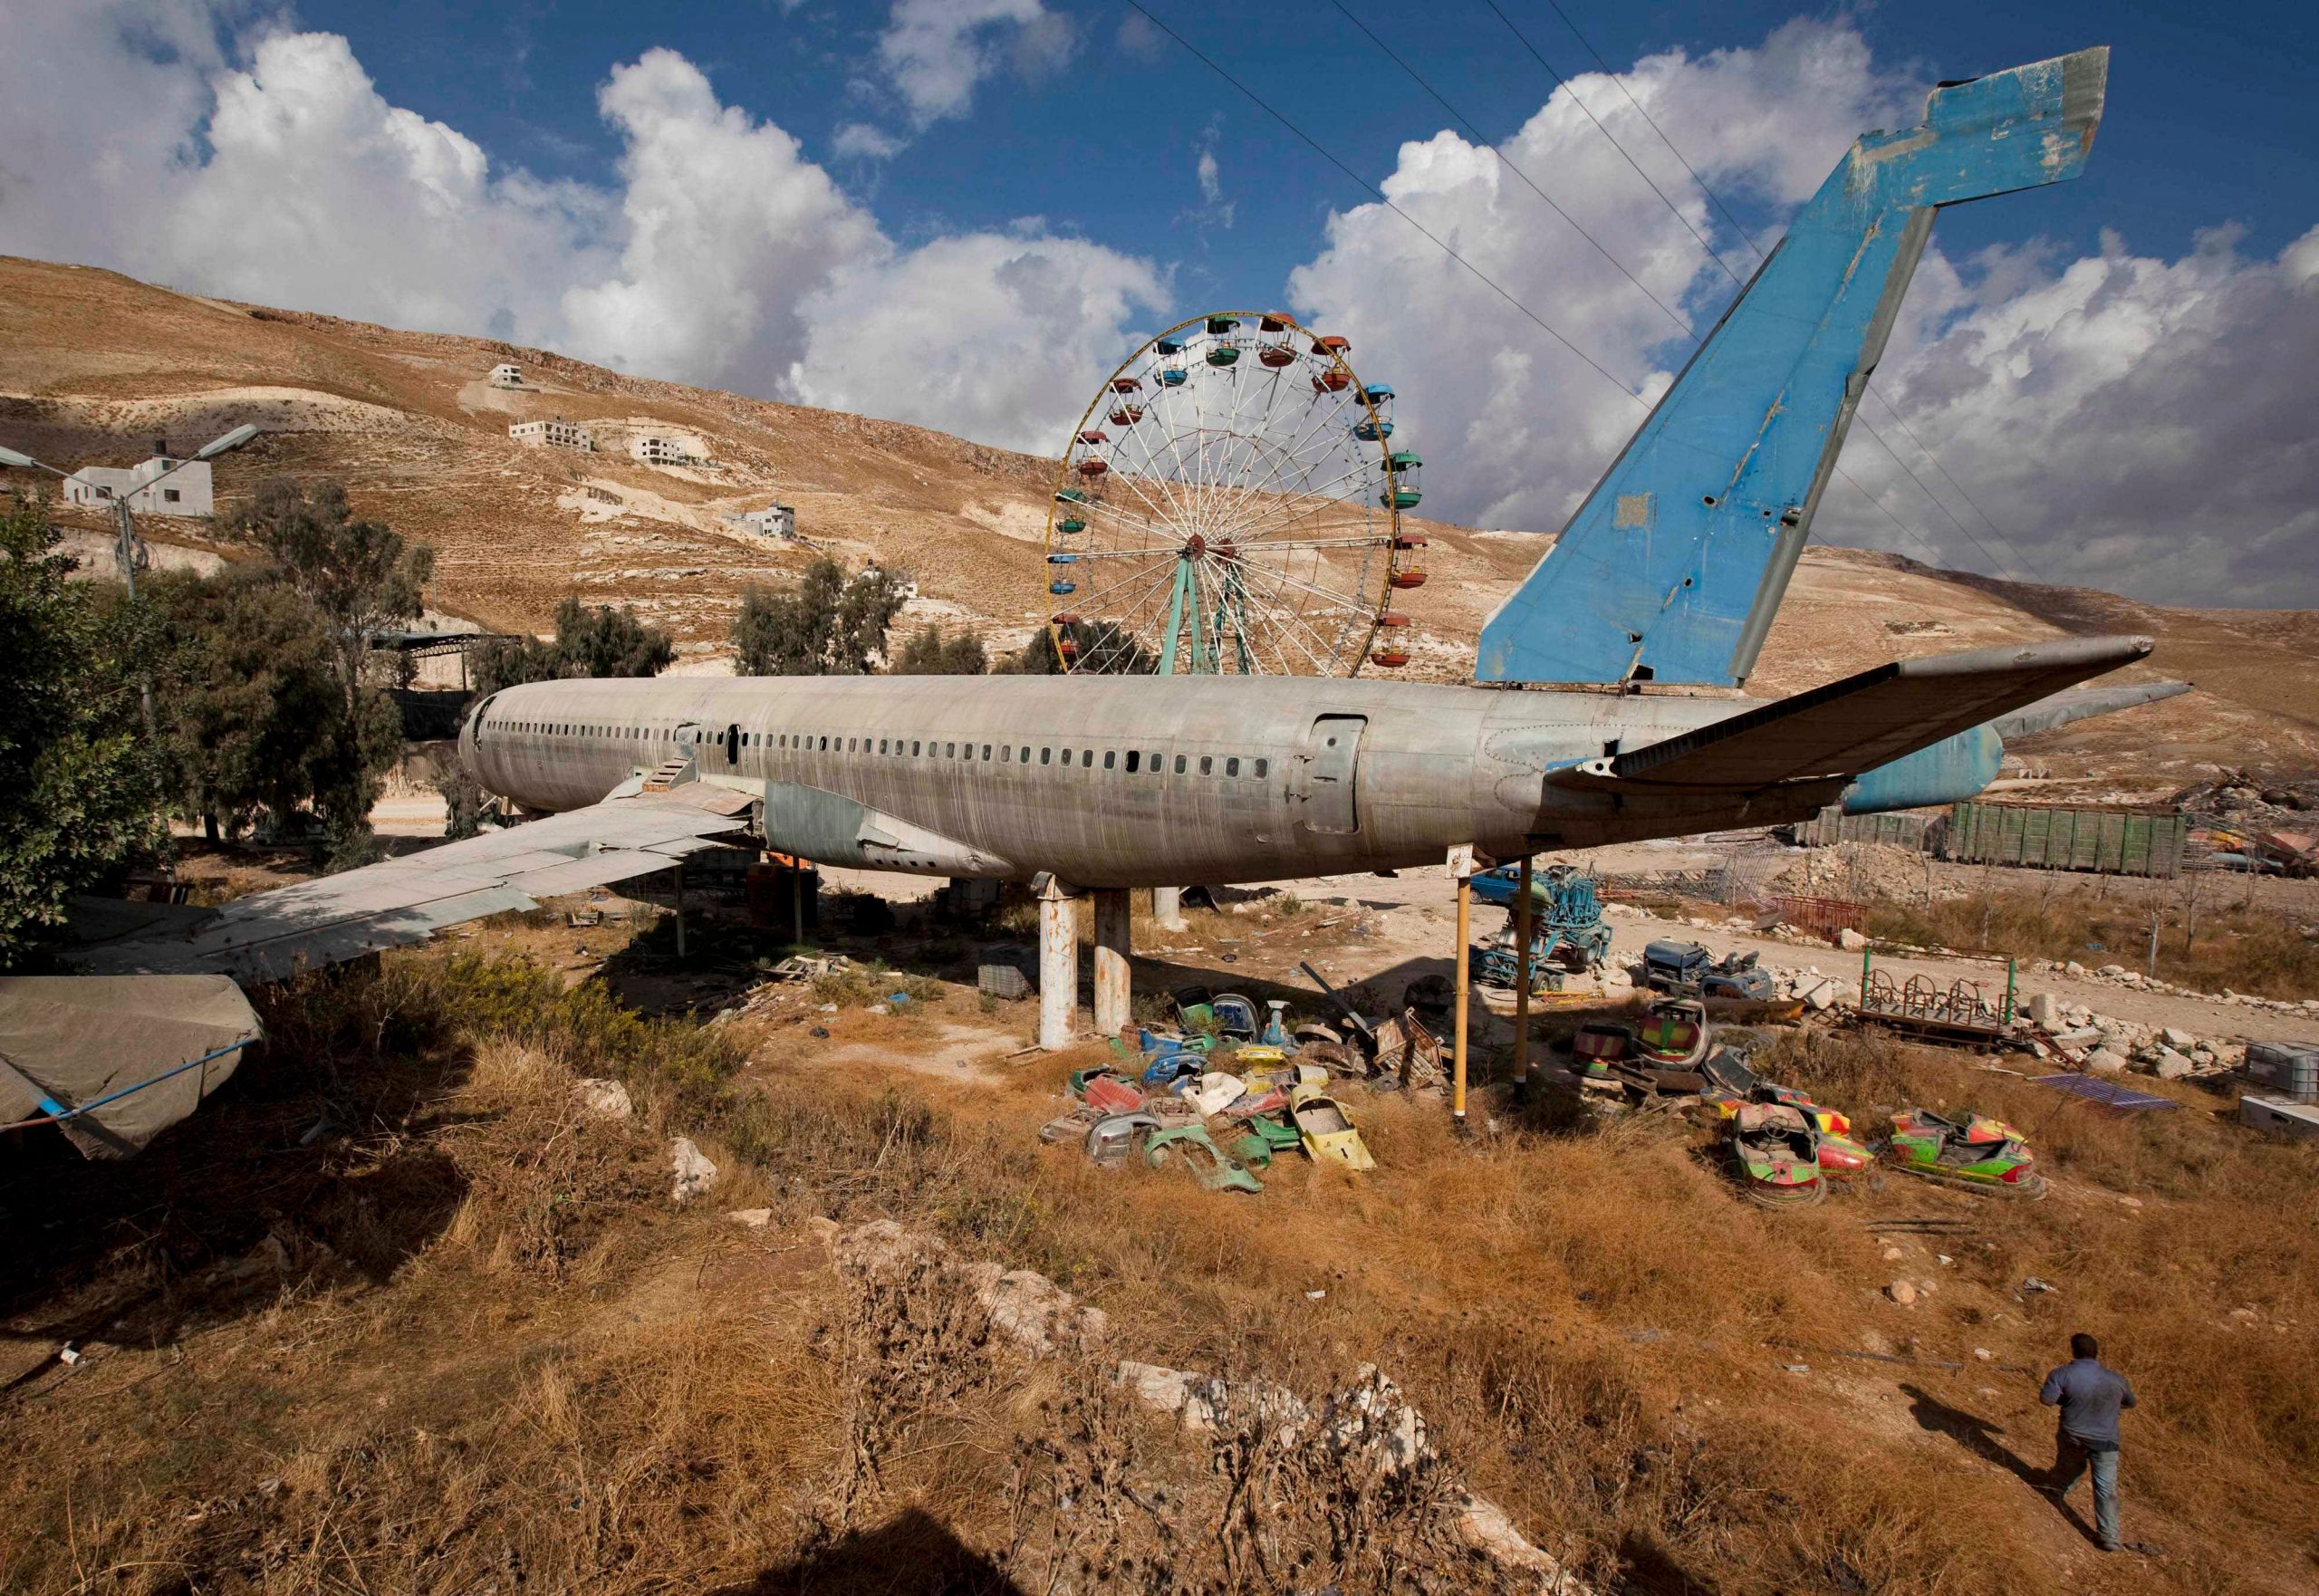 In pics: West Bank gets its first airport experience in an old plane-turned cafe